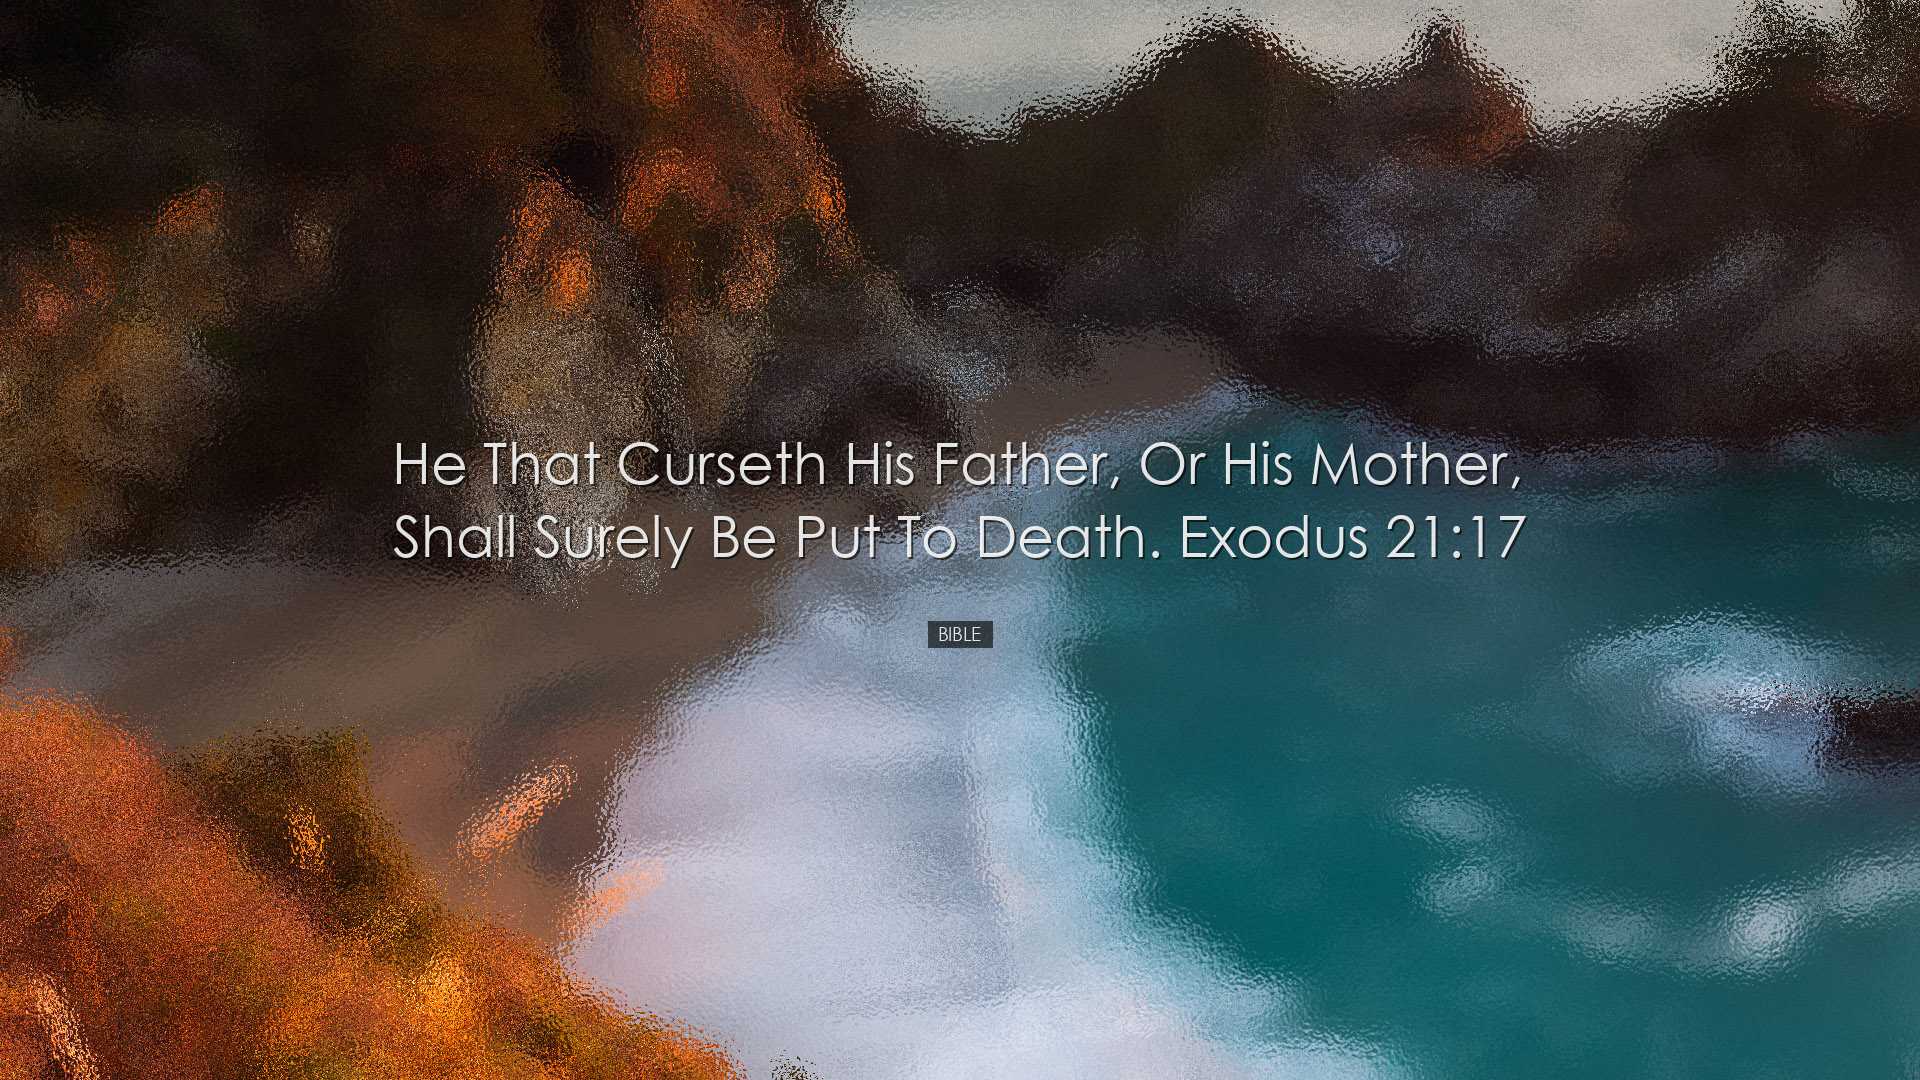 He that curseth his father, or his mother, shall surely be put to